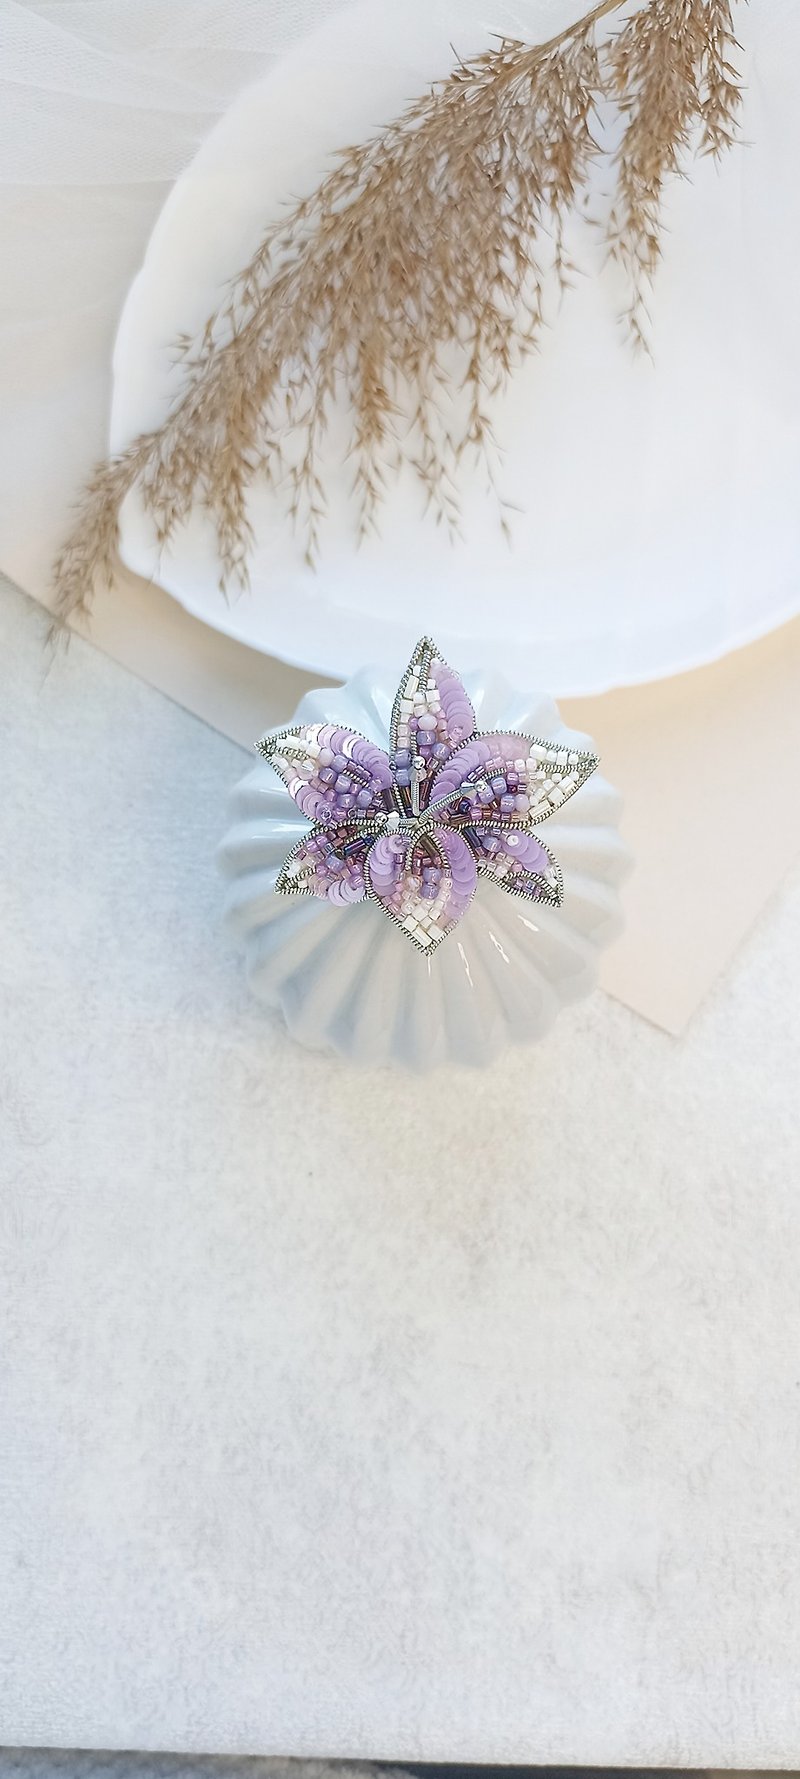 Delicate flower pin as a gift for a girl and a woman, hand-embroidered flower br - เข็มกลัด - สแตนเลส สีเงิน